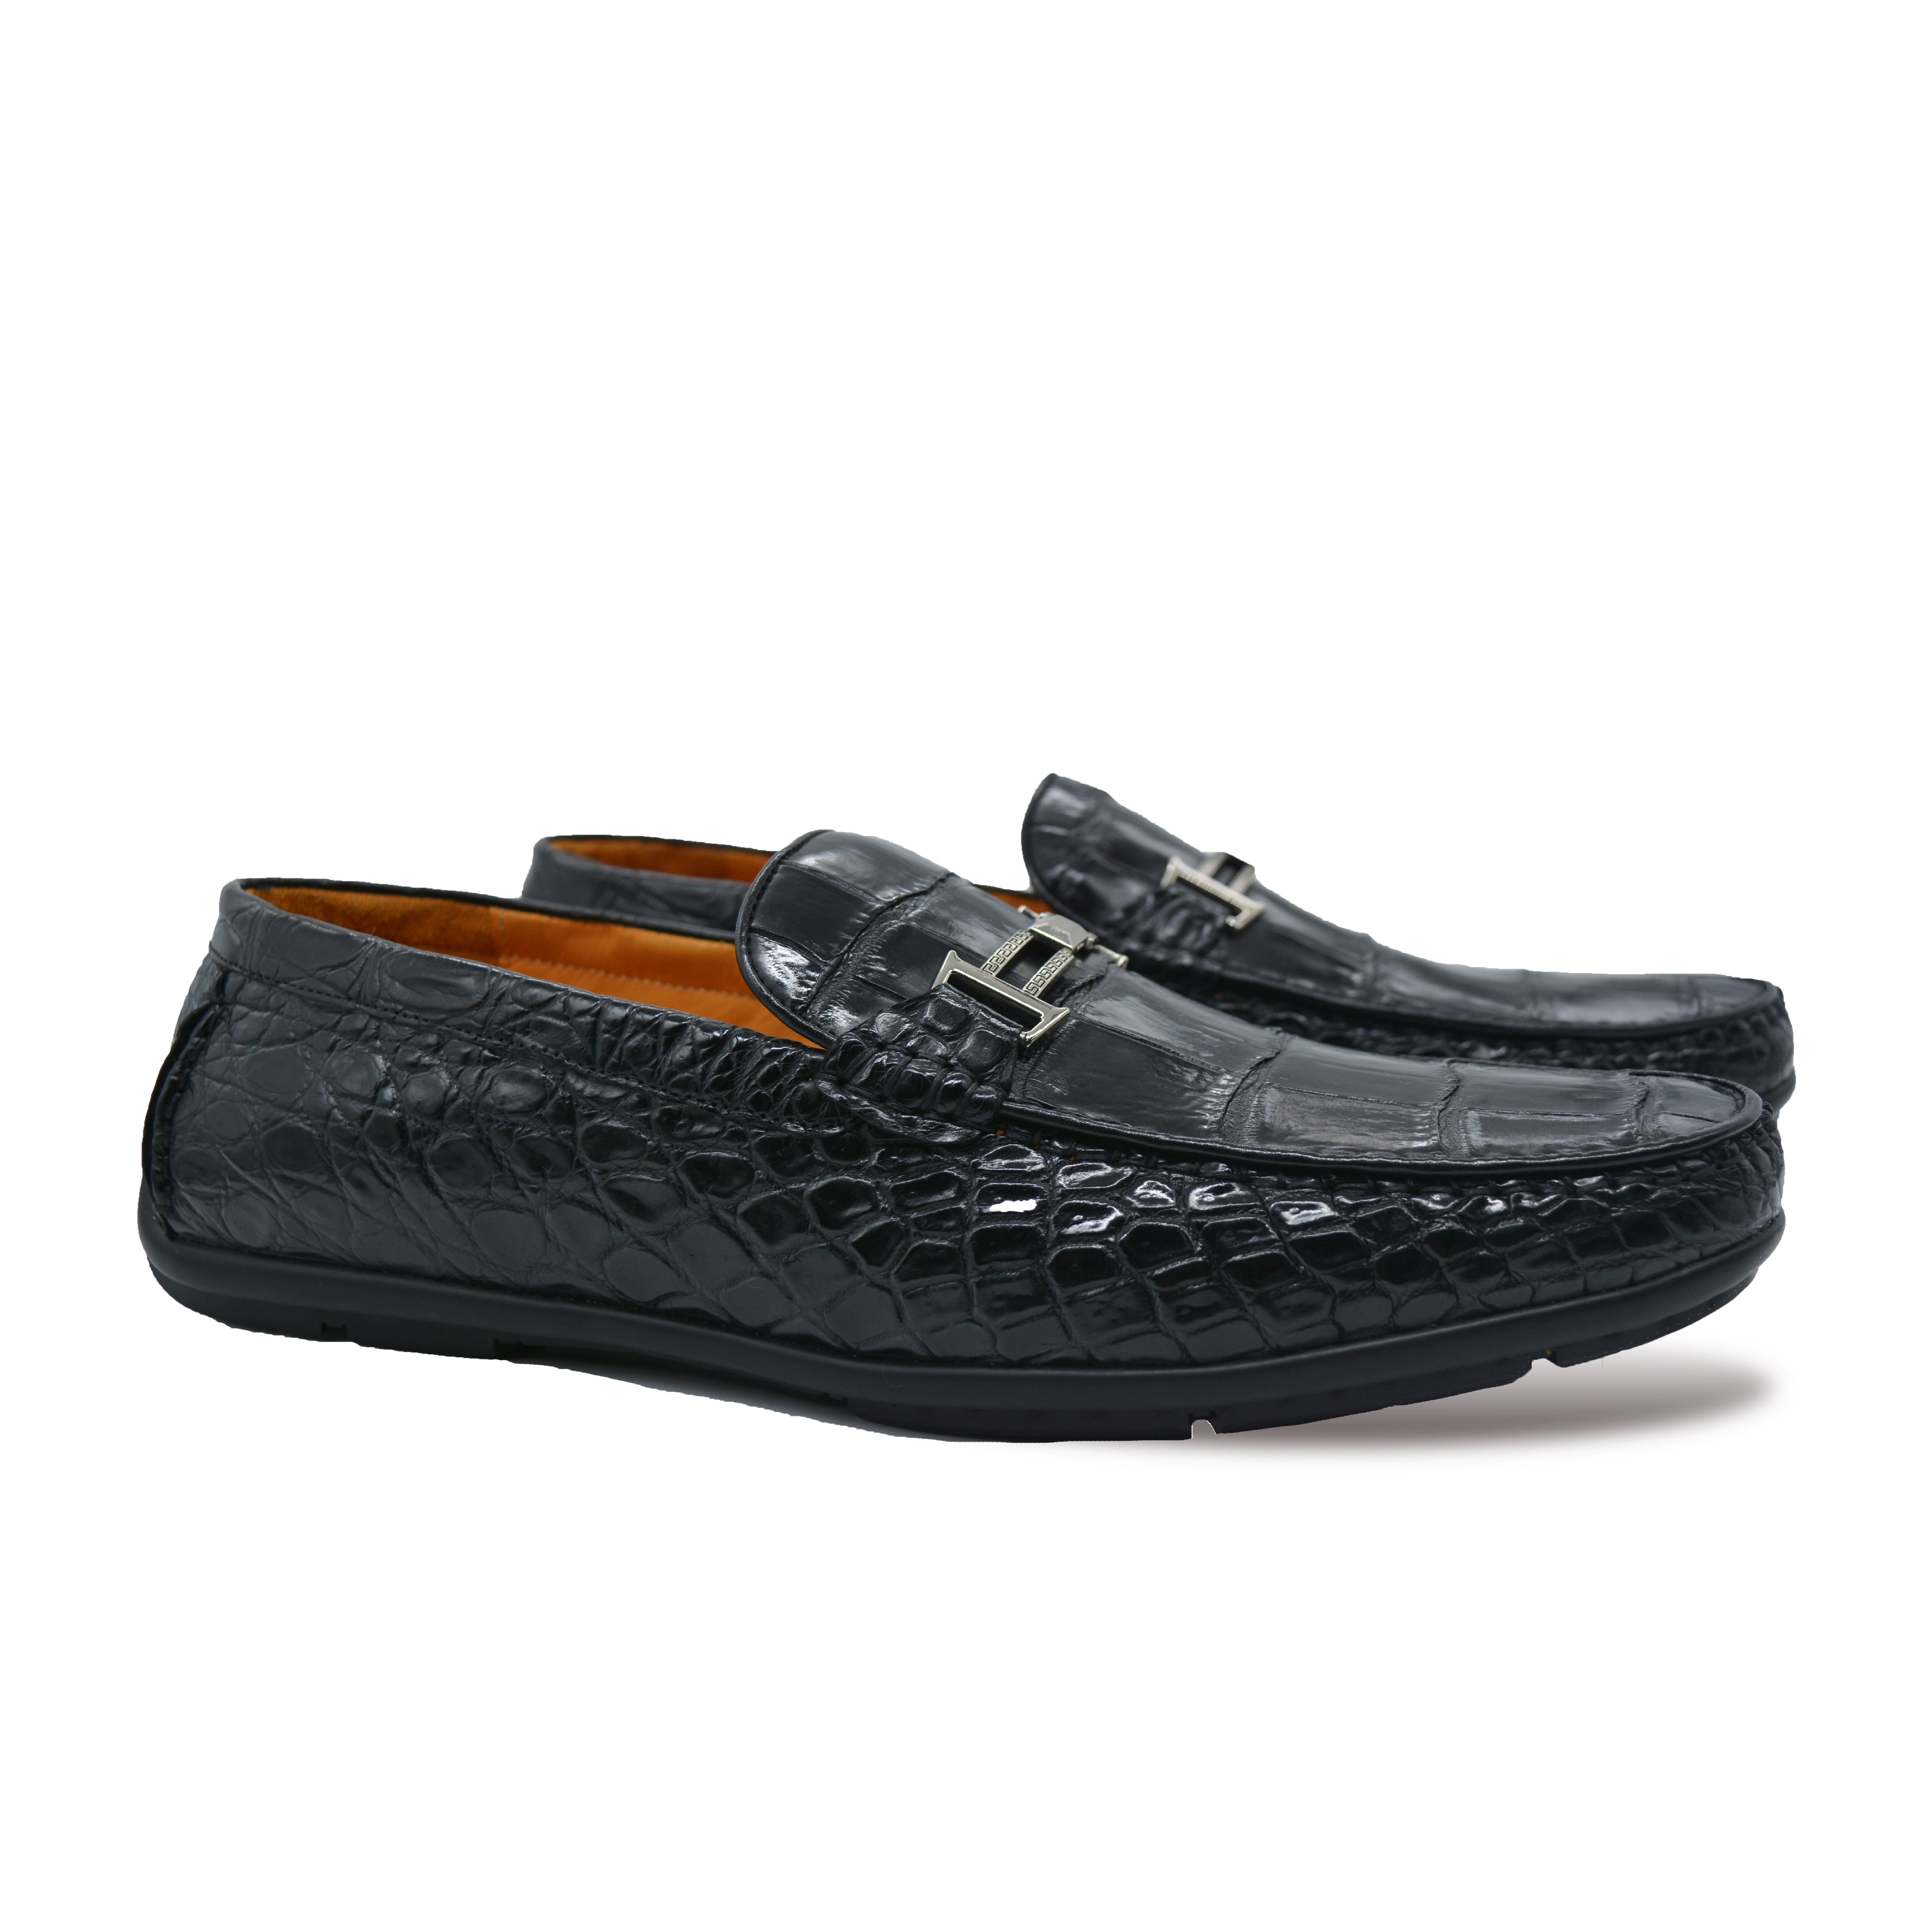 Men's Black Slip-on Shoes Genuine Leather Slip-on Casual Fashion Leather Shoes